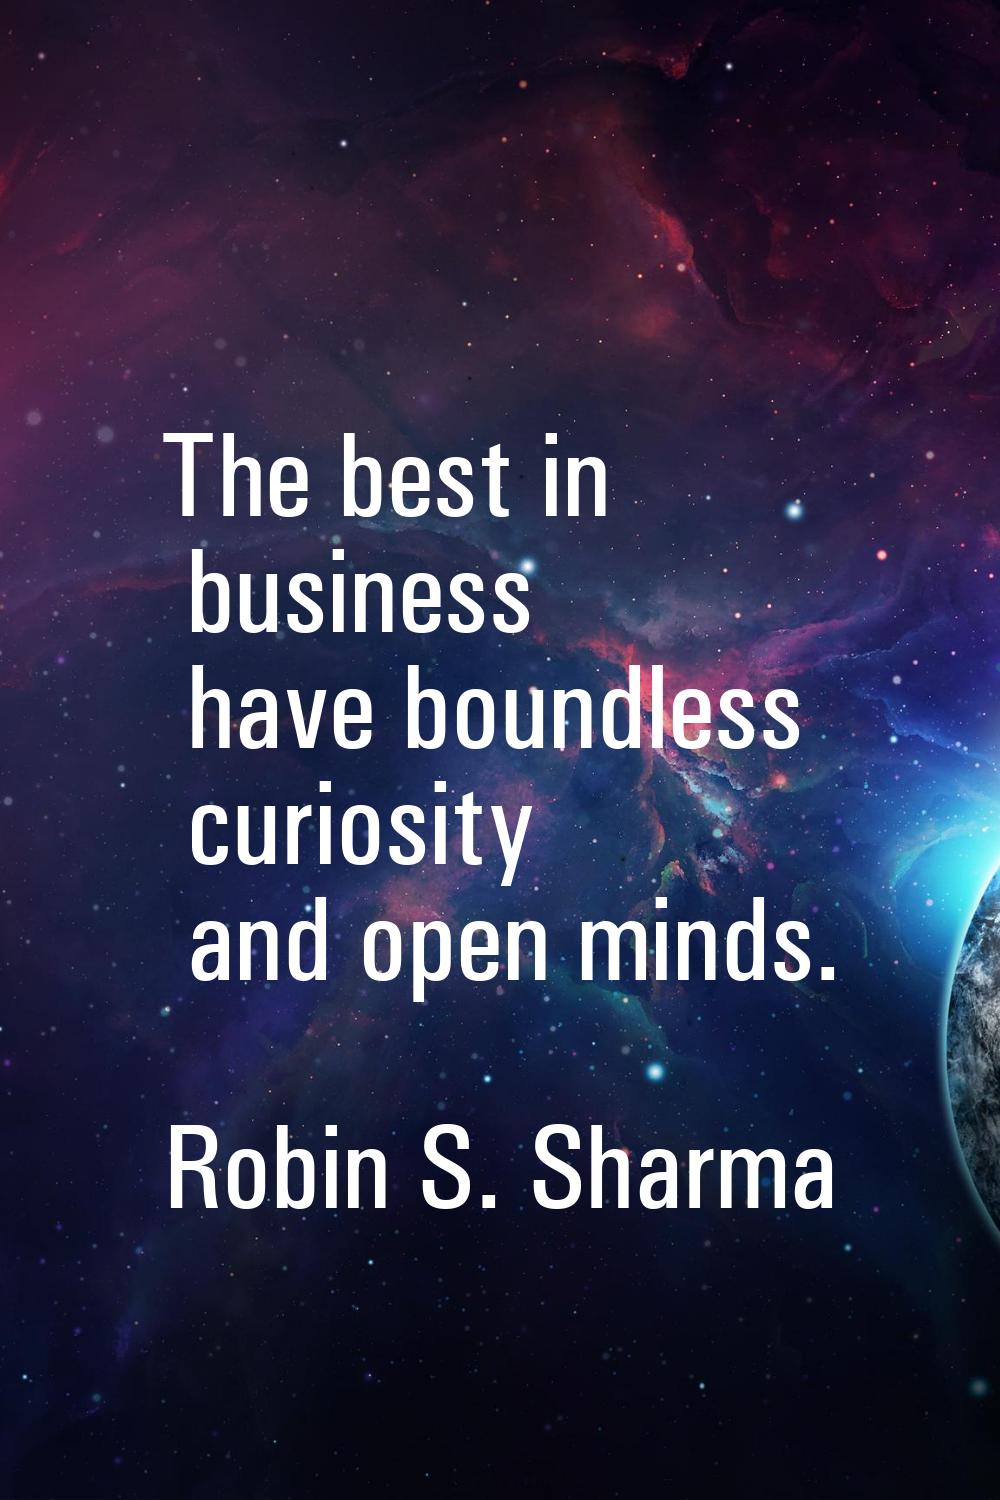 The best in business have boundless curiosity and open minds.